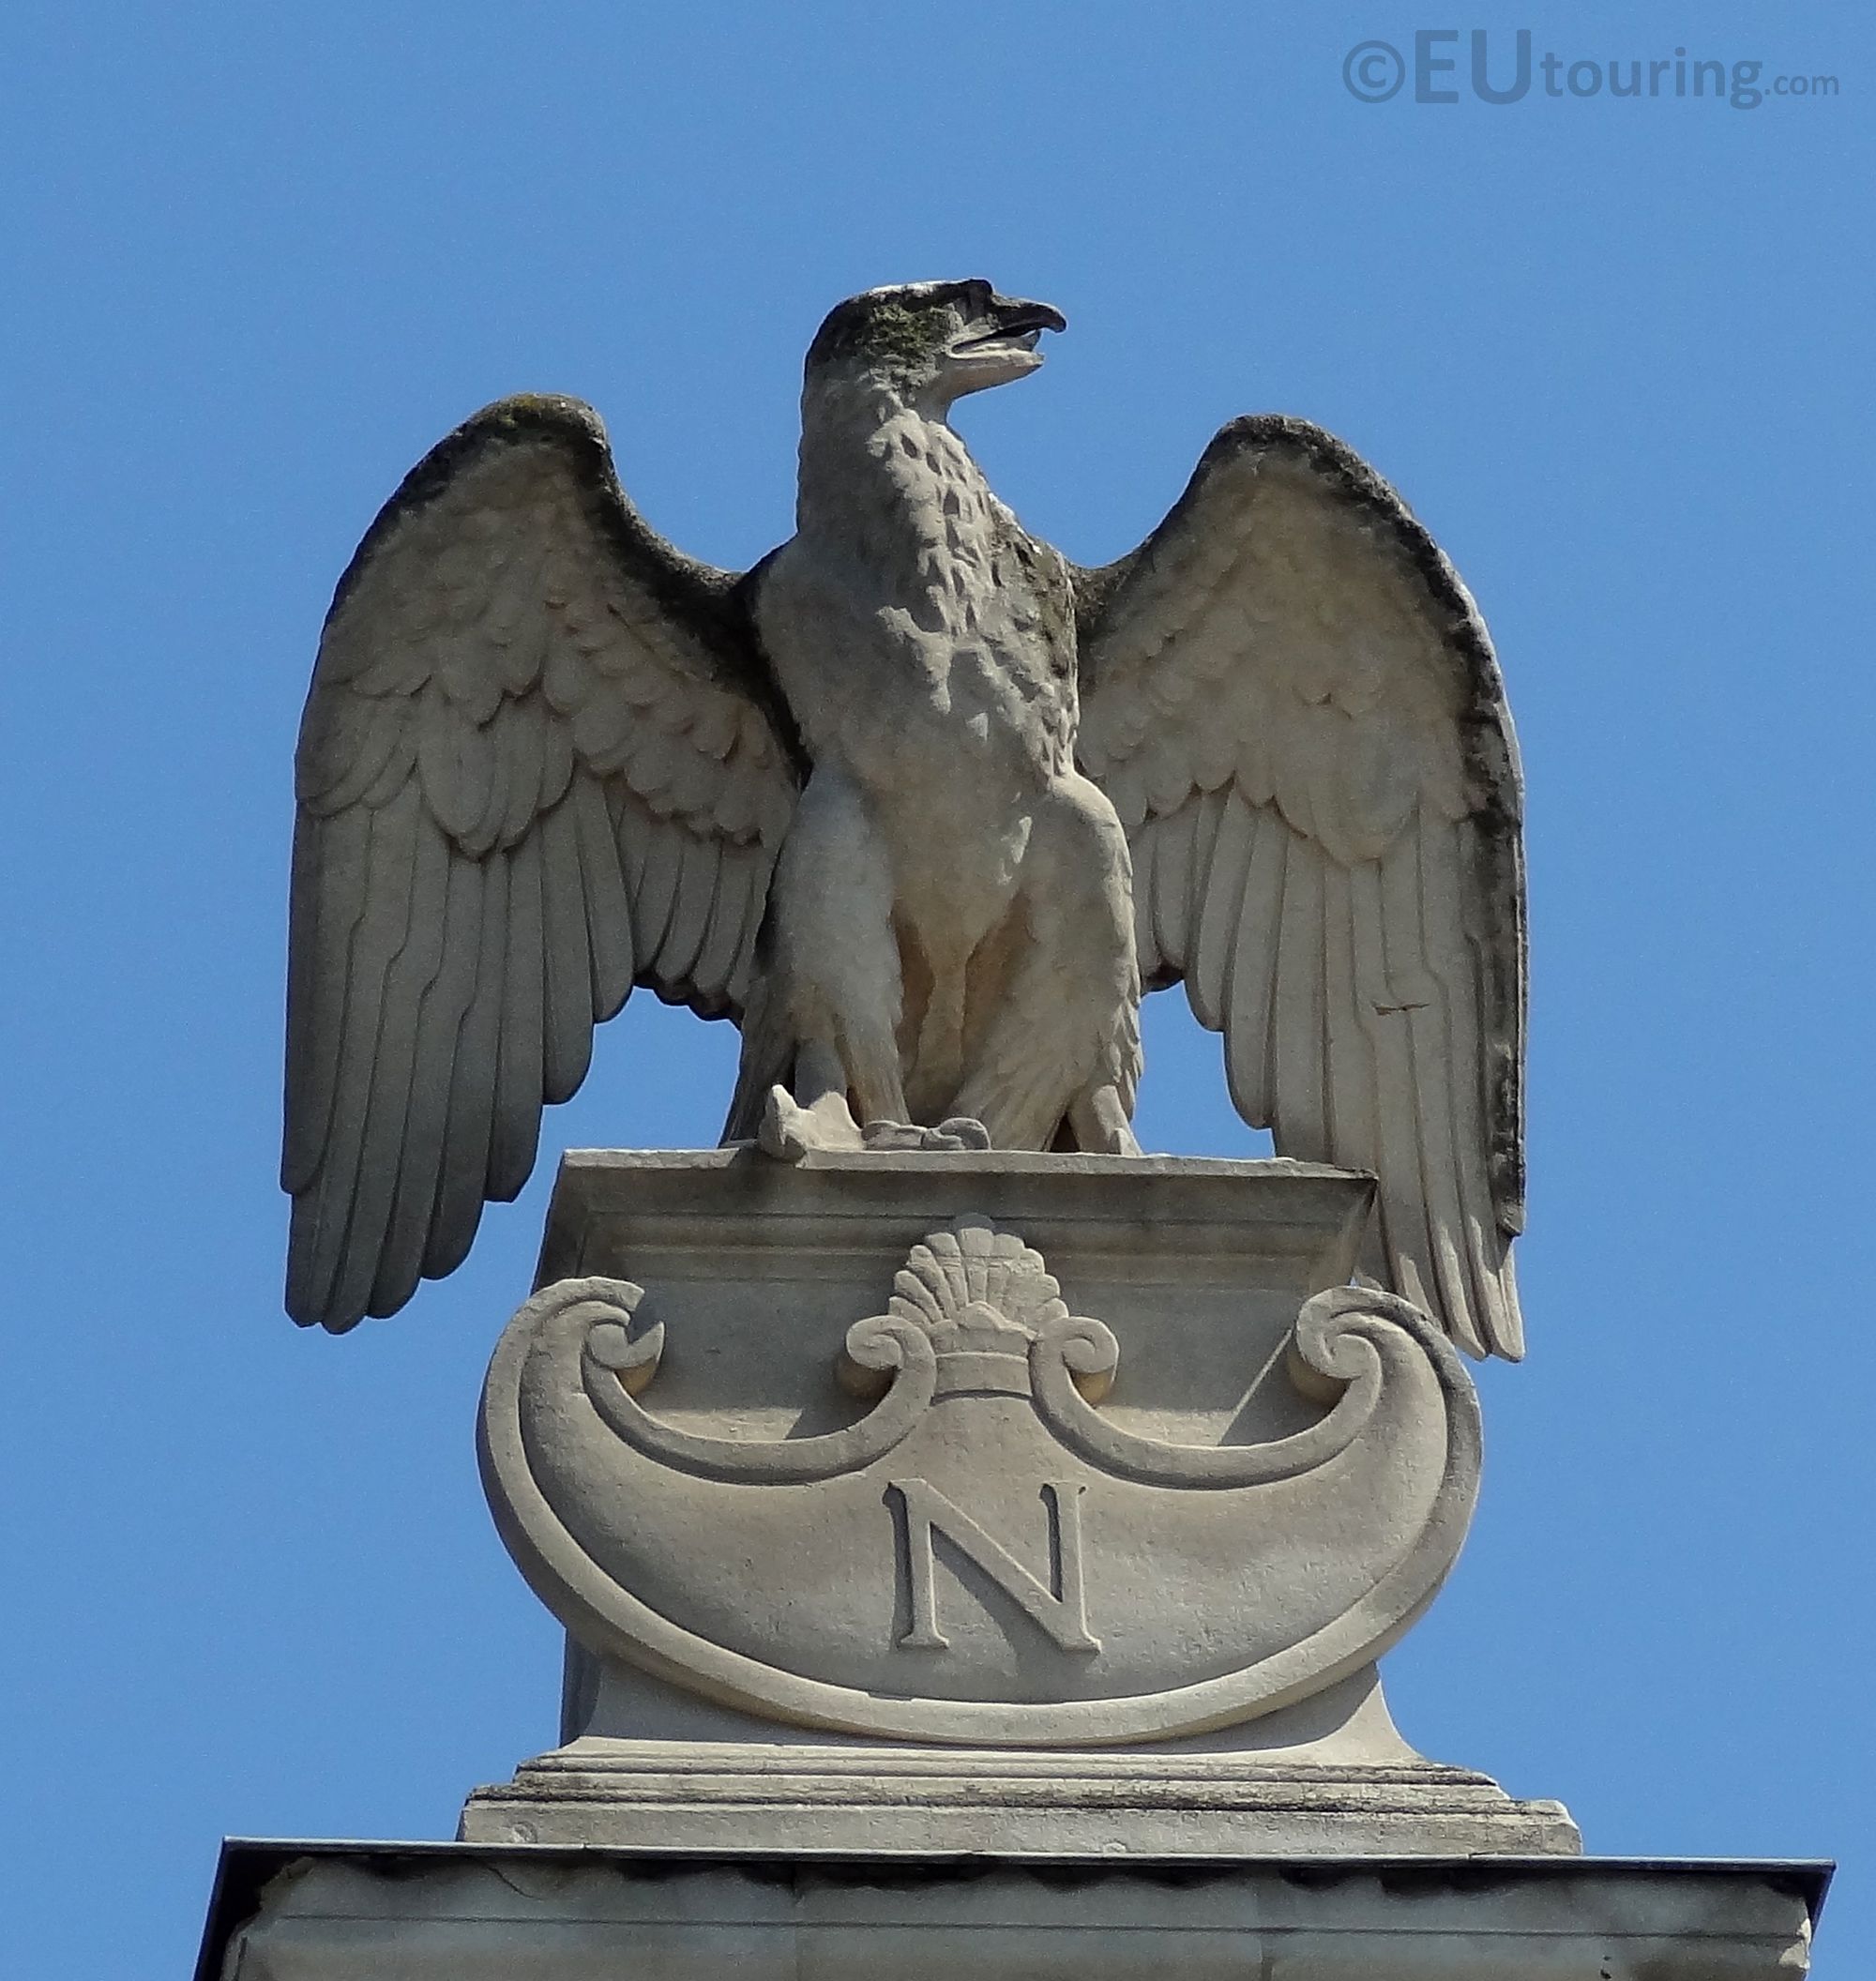 RAF memorial. The Golden Eagle statue. You will find this in London ...